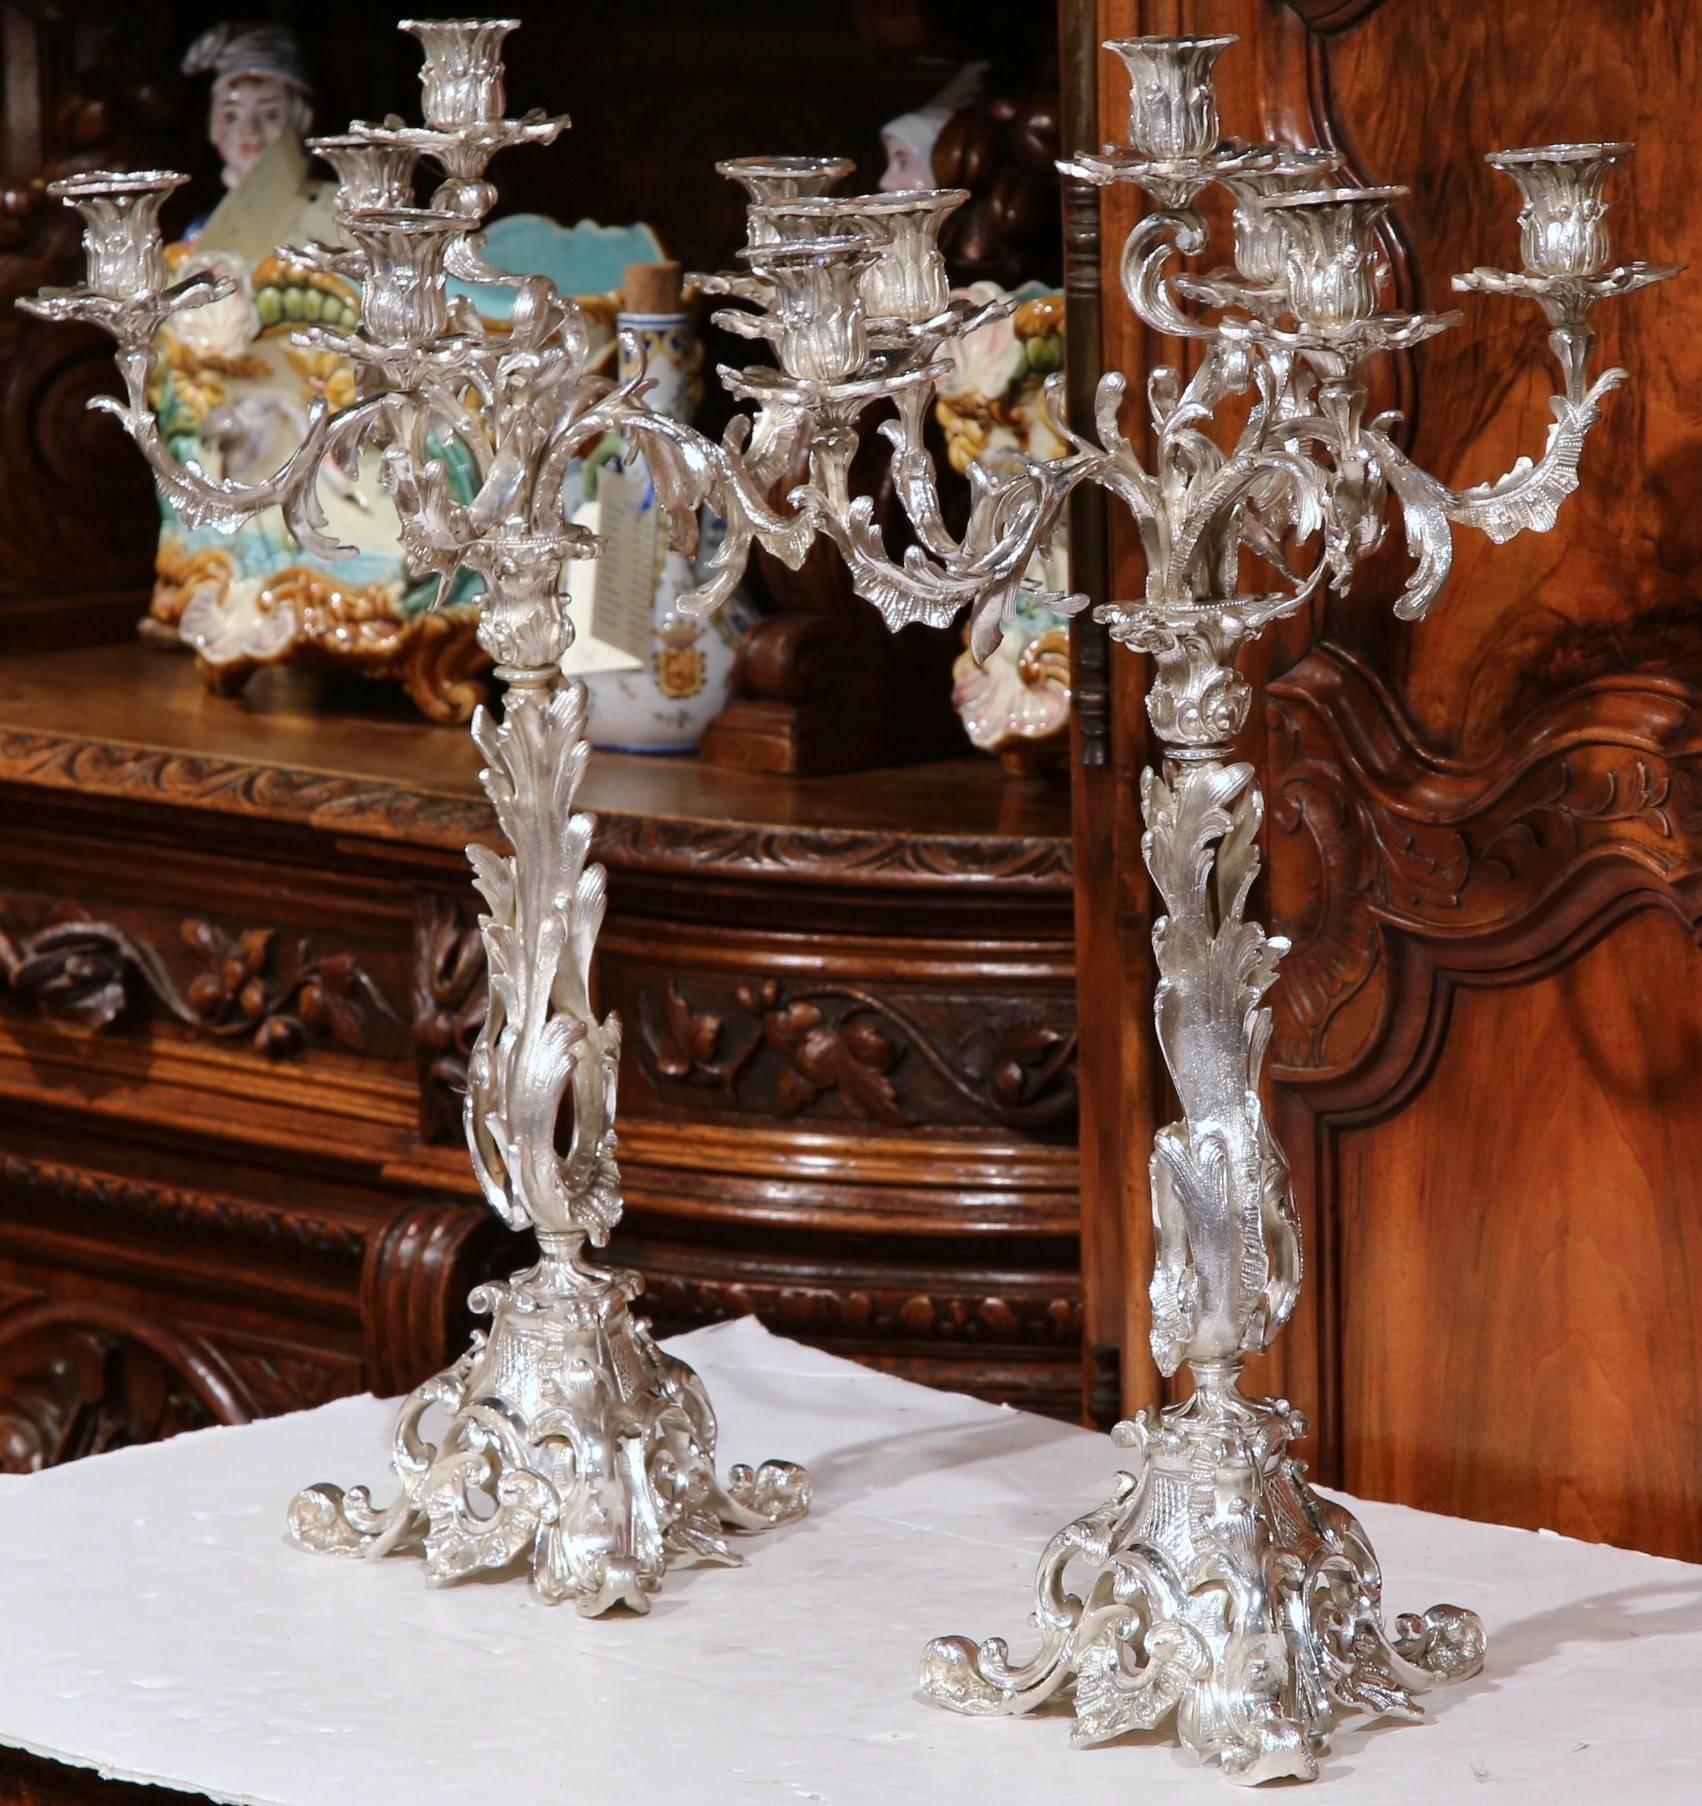 This beautiful pair of tall, bronze candelabras were created in France, circa 1850. Each of the ornate pieces has a silver plated finish and features intricate scrolled work on the stem, the five arms, and the curved feet at the base. This elegant